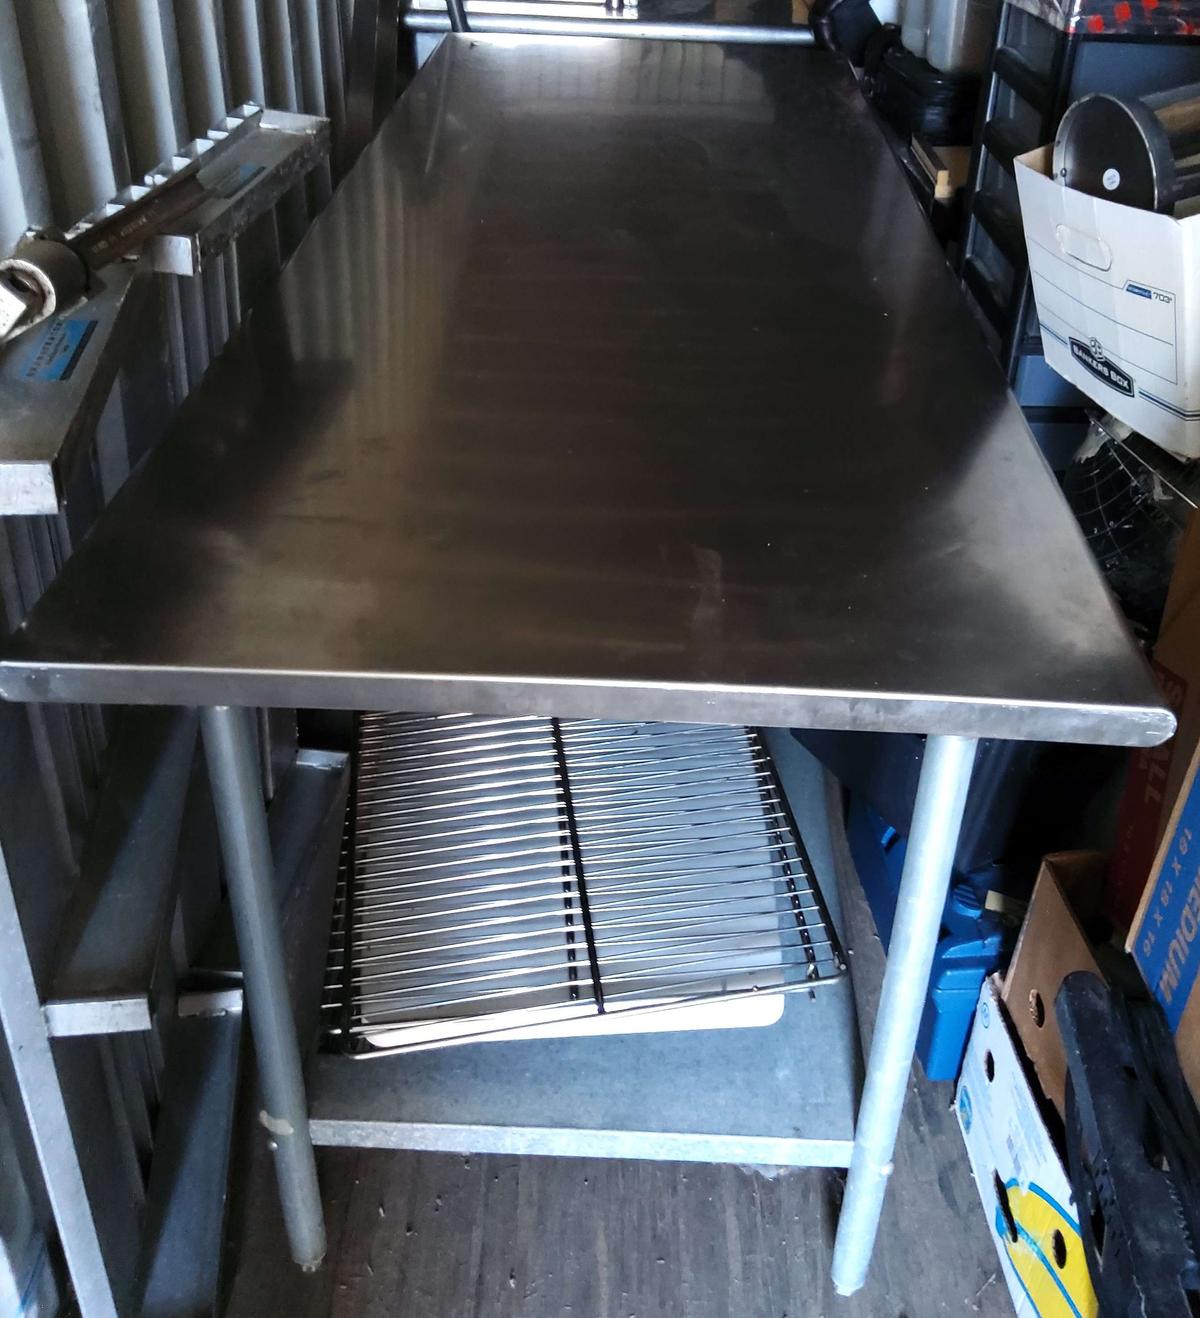 Stainless steel 2-drawer work area